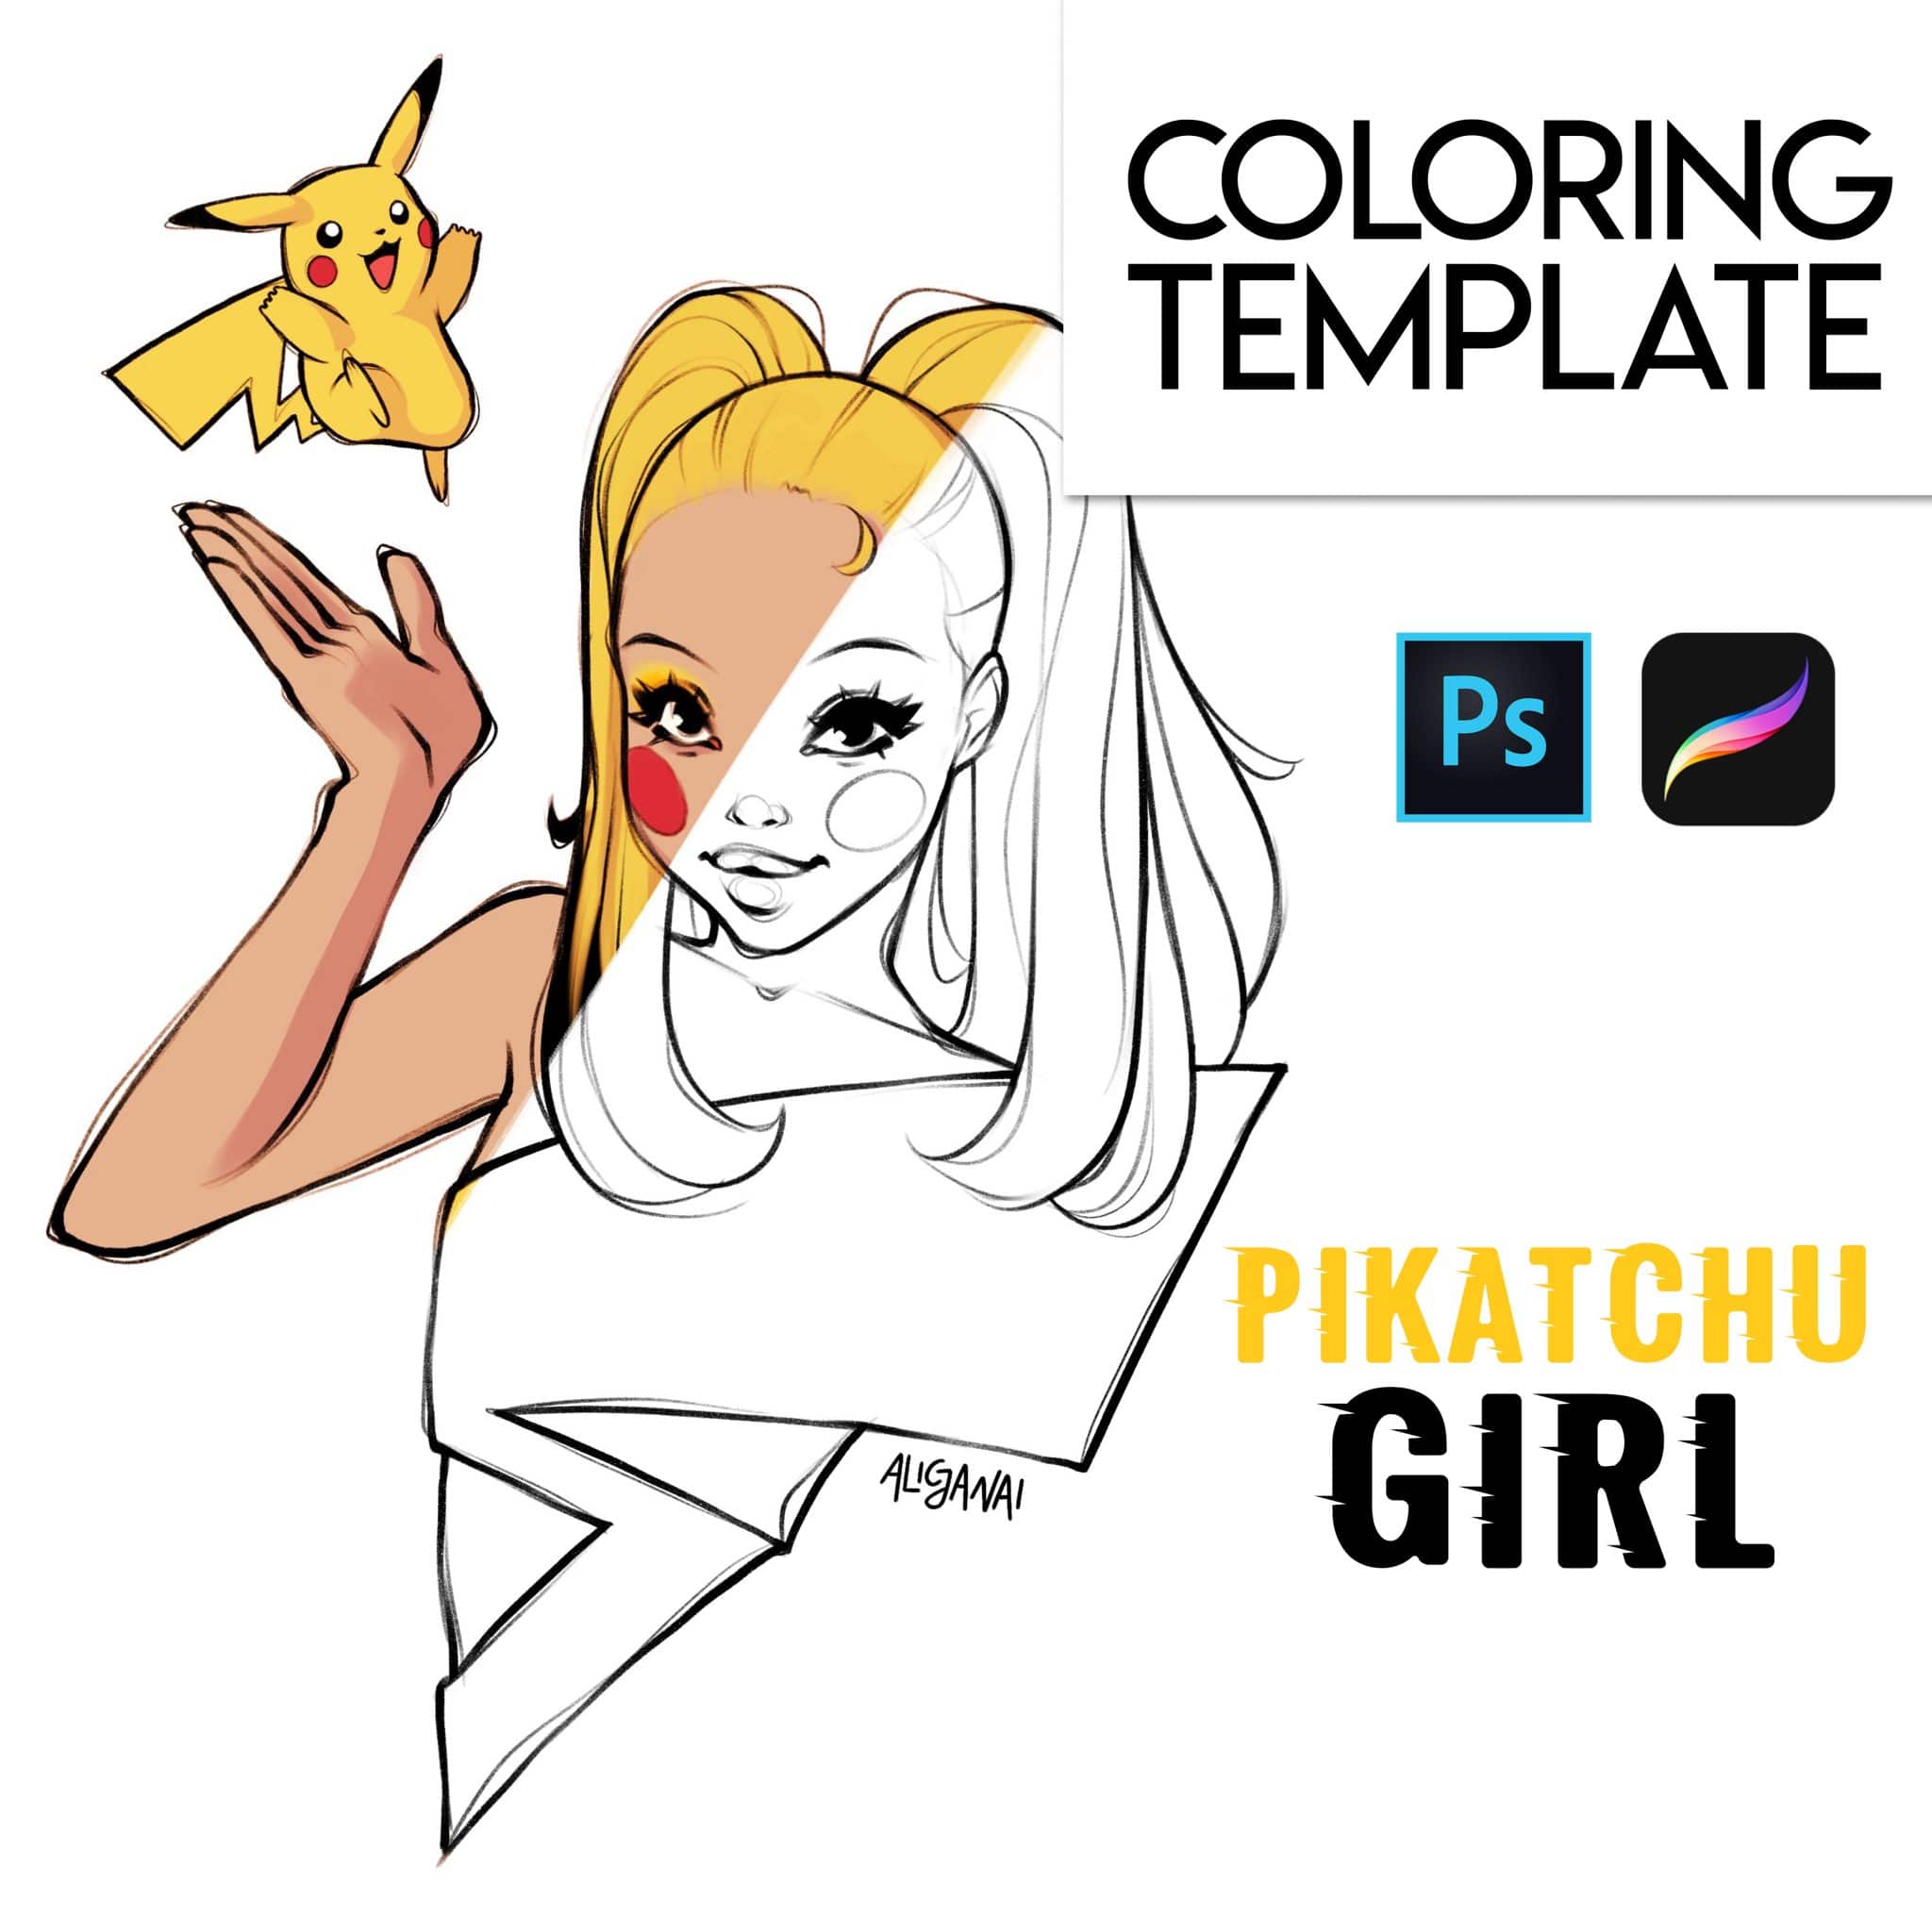 Pikachu girl coloring page for procreate photoshop and pdf